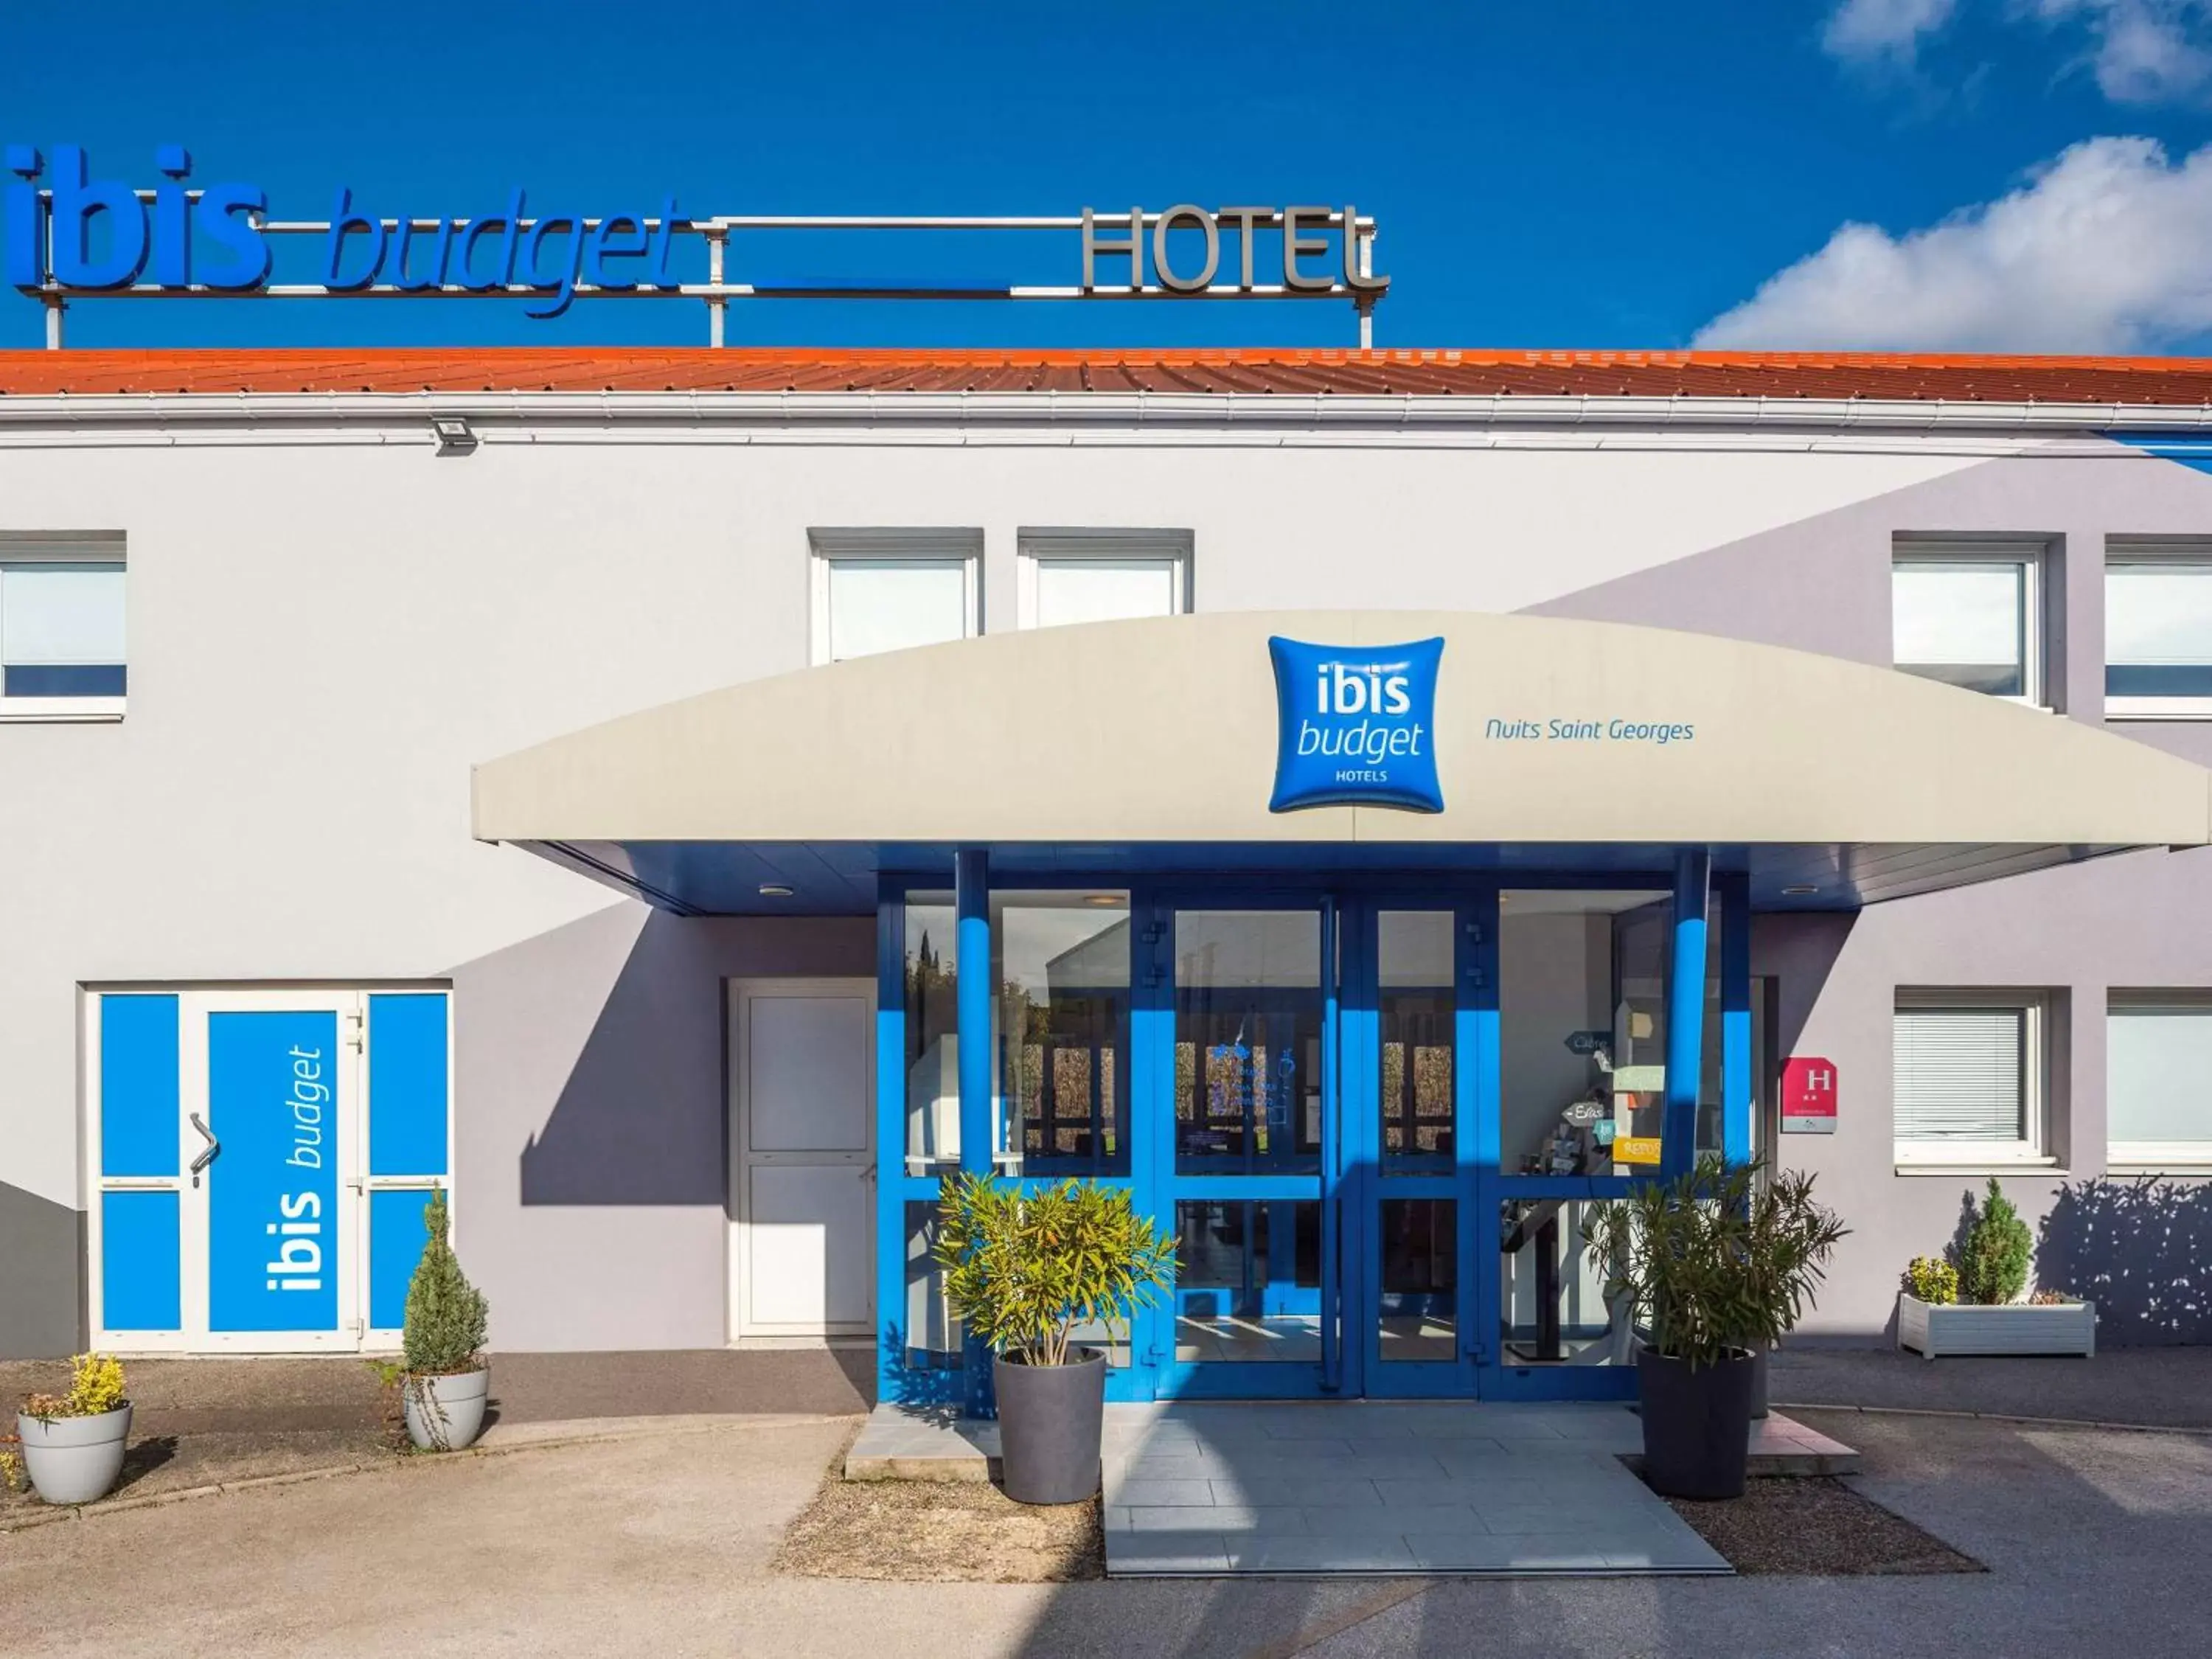 Property building in ibis budget Nuits Saint Georges